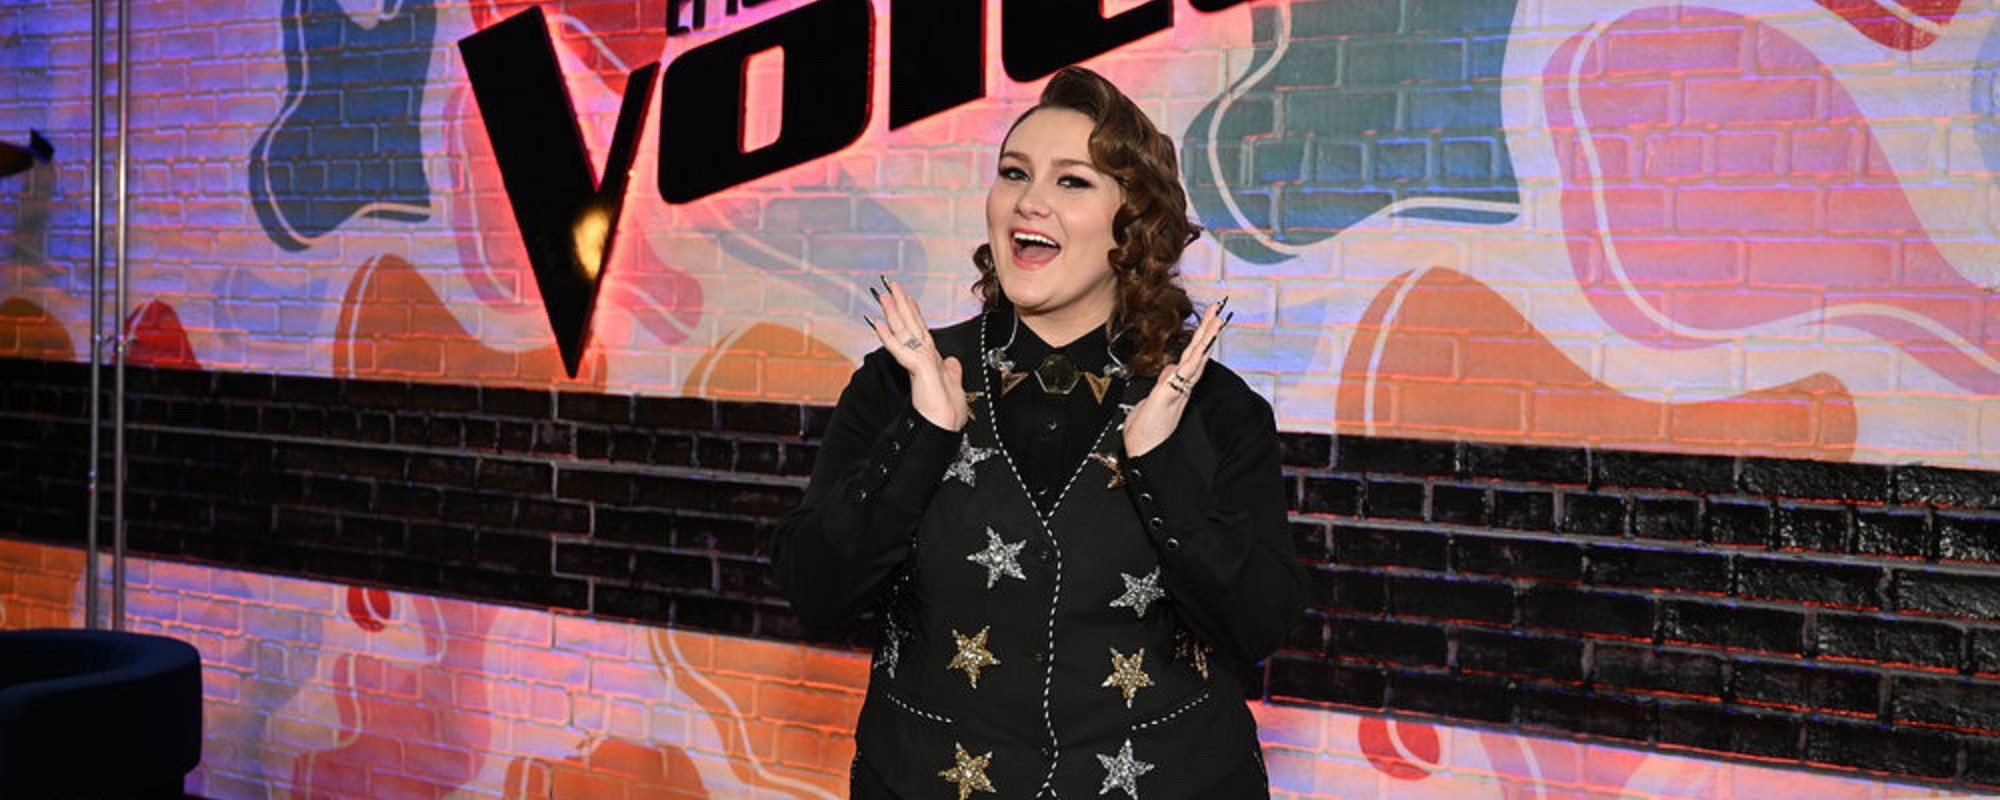 ‘The Voice’ Runner-up Ruby Leigh Shows Her Range with an Impressive Cover of a Classic Cranberries Song